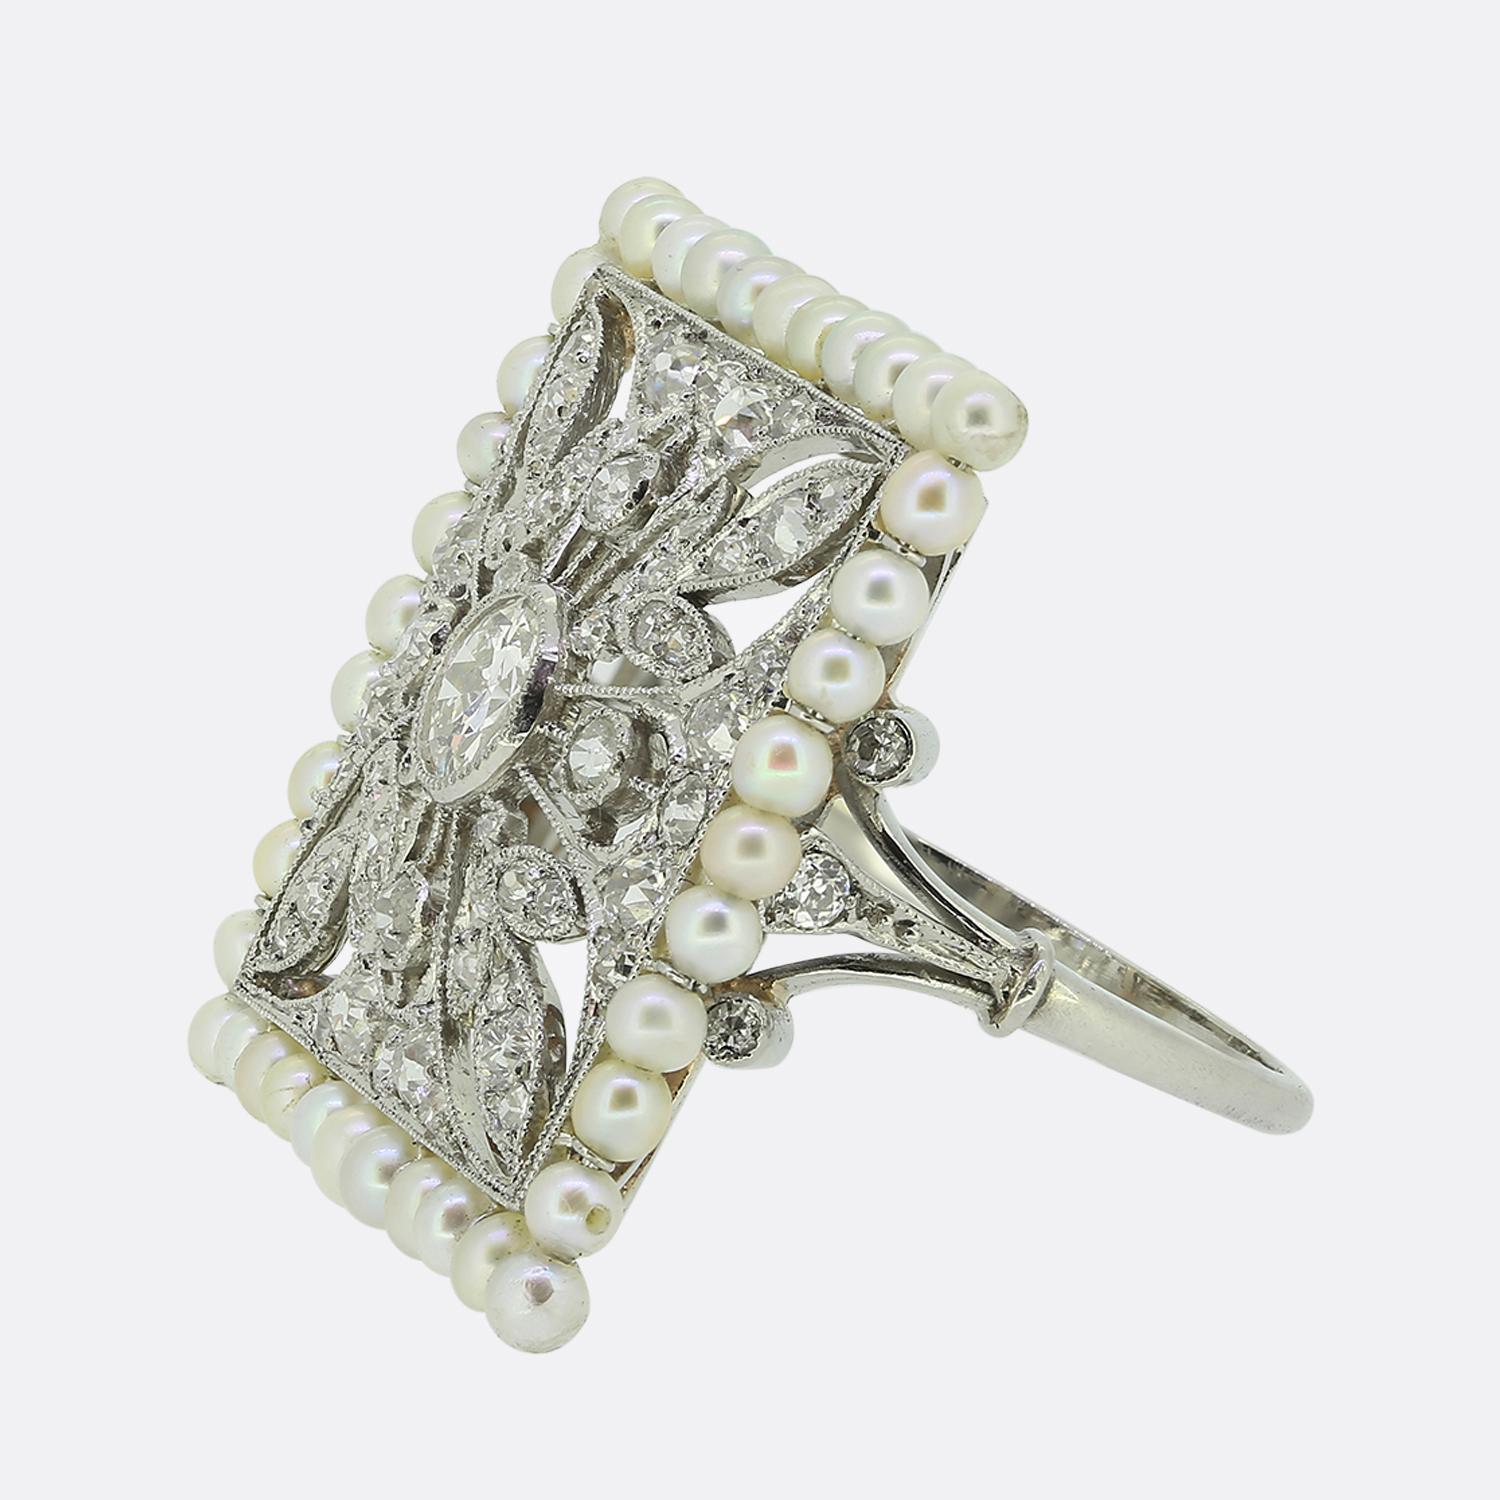 Here we have an outstanding dress ring crafted at a time when the Art Deco style was at the height of design. The tone of piece is set by intricate filigree work which acts as the backdrop to multiple foliated motifs playing host to a vast array of